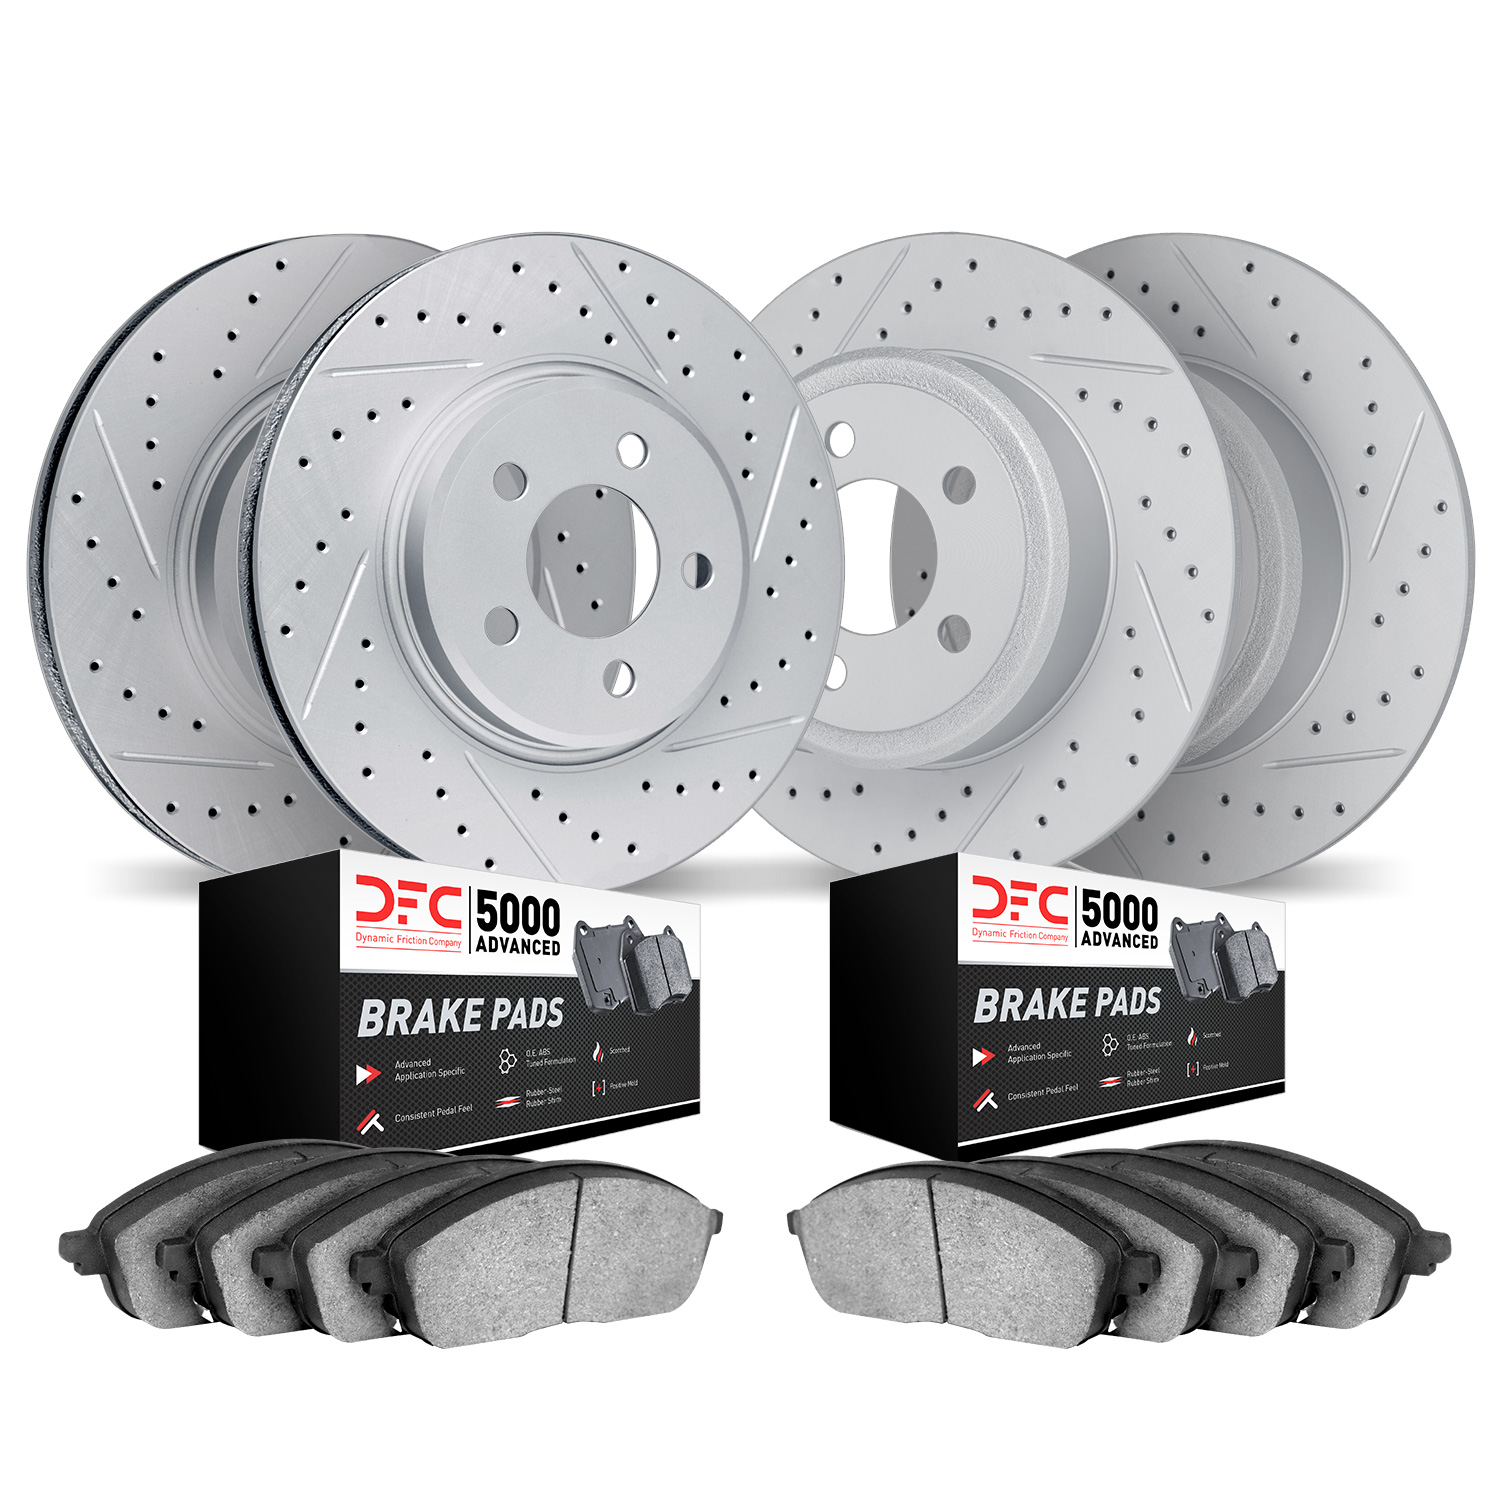 2504-54255 Geoperformance Drilled/Slotted Rotors w/5000 Advanced Brake Pads Kit, 1999-2004 Ford/Lincoln/Mercury/Mazda, Position: